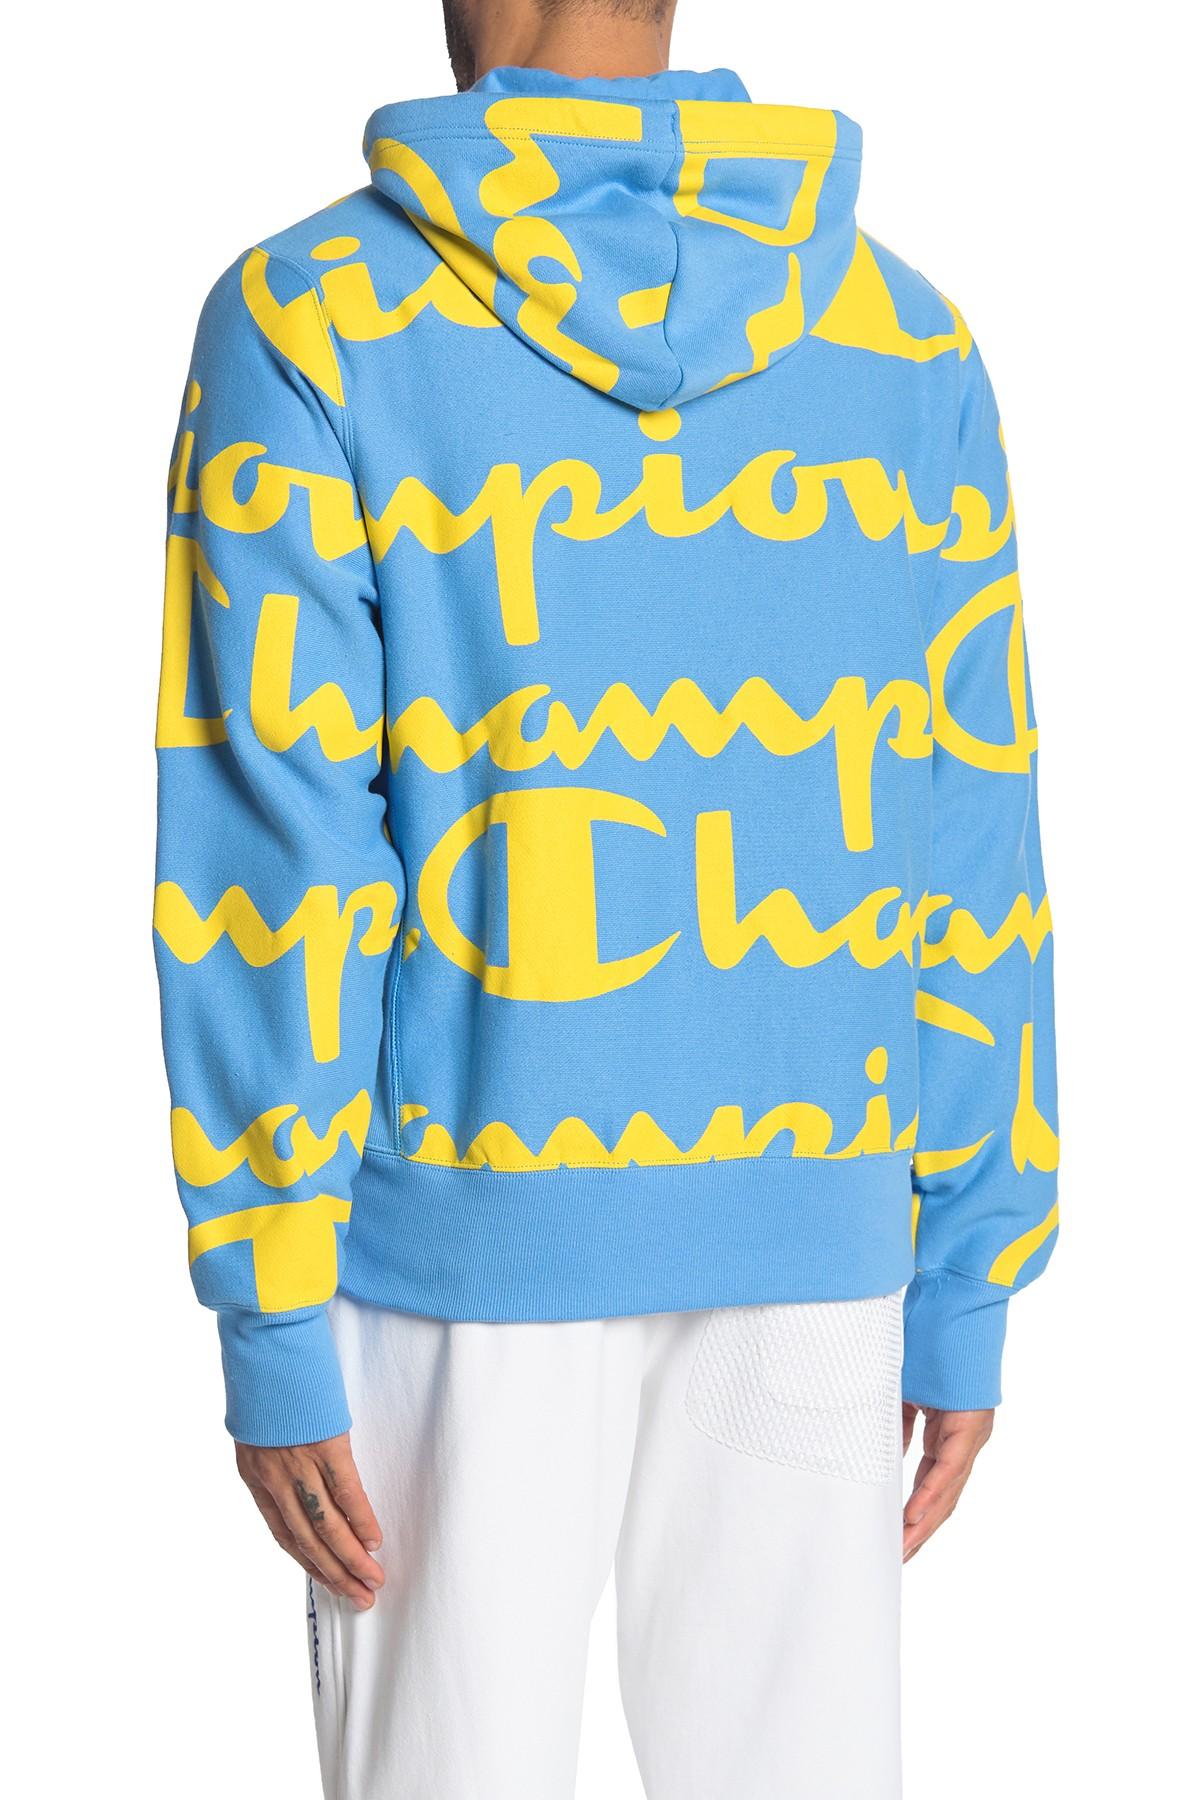 Champion All Over Print Hooded Sweatshirt in Blue/Yellow (Blue) for Men -  Lyst